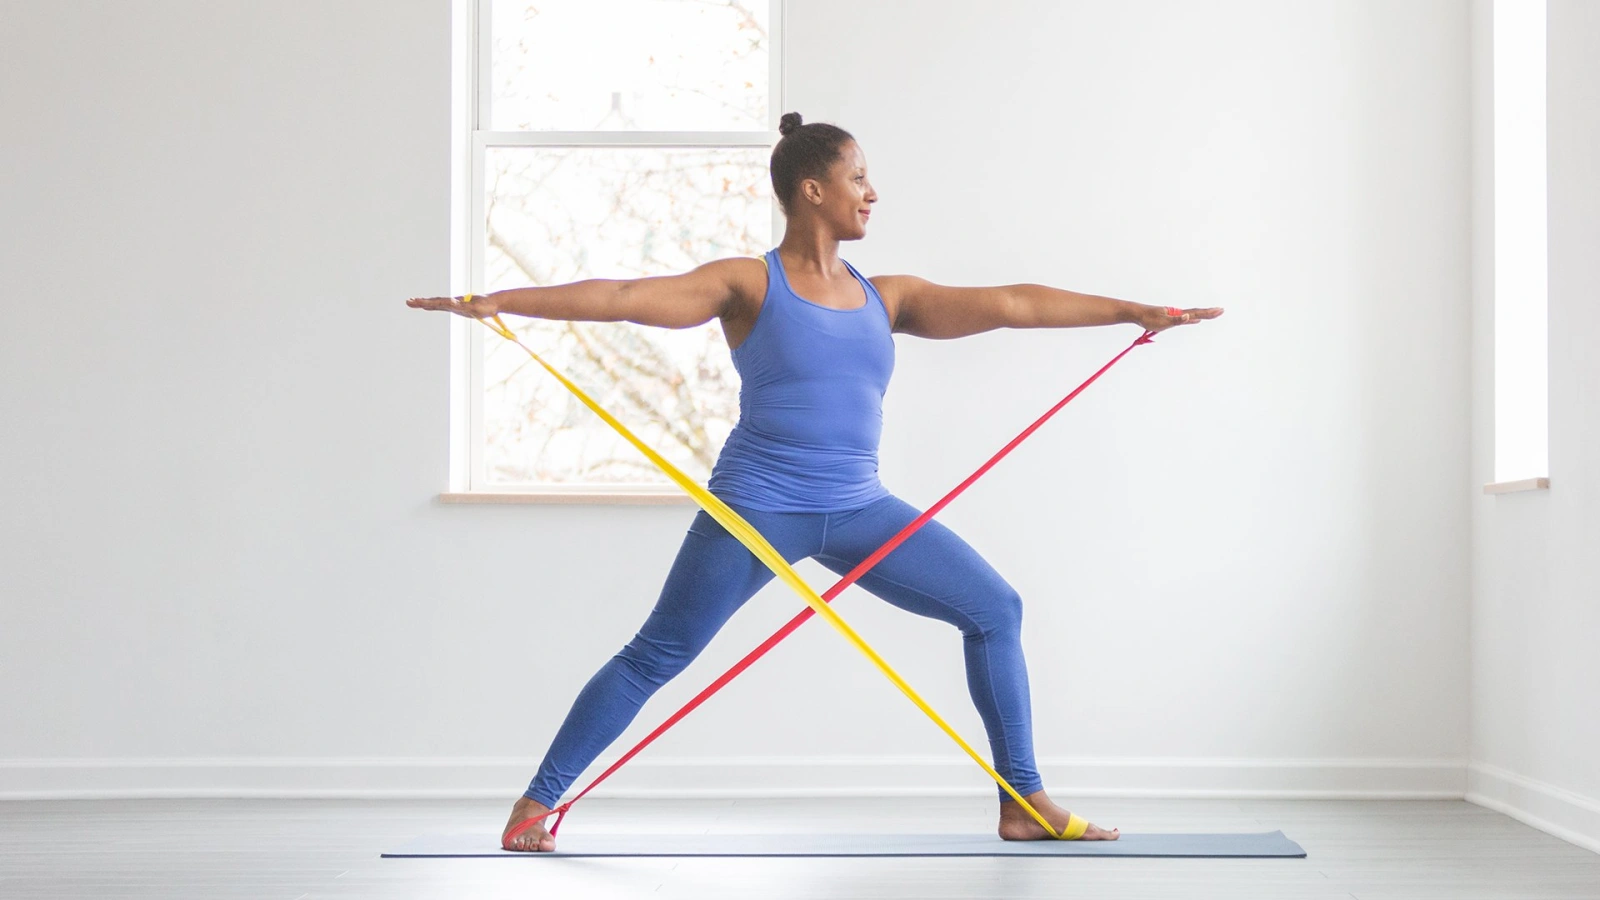 5 Ways to Use Resistance Bands for Yoga — YOGABYCANDACE